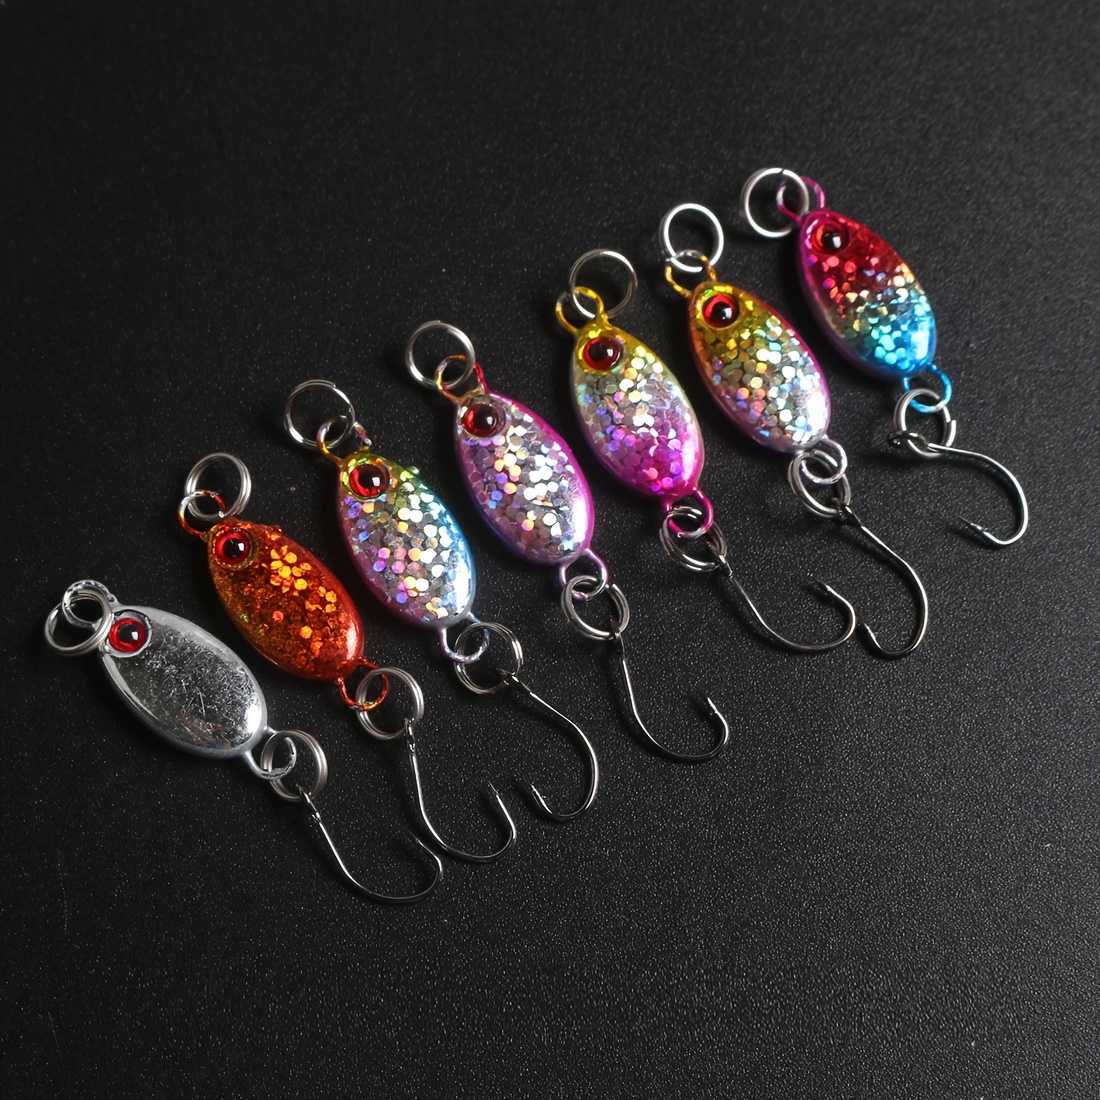 Fishing Lures Fishing Spoons, Hard Lures Saltwater Spoon Lures Casting  Spoon/Fishing Jigs for Trout Bass Pike Walleye Crappie Bluegill 1/8oz -  China Fishing Tackle and Fishing Lure price